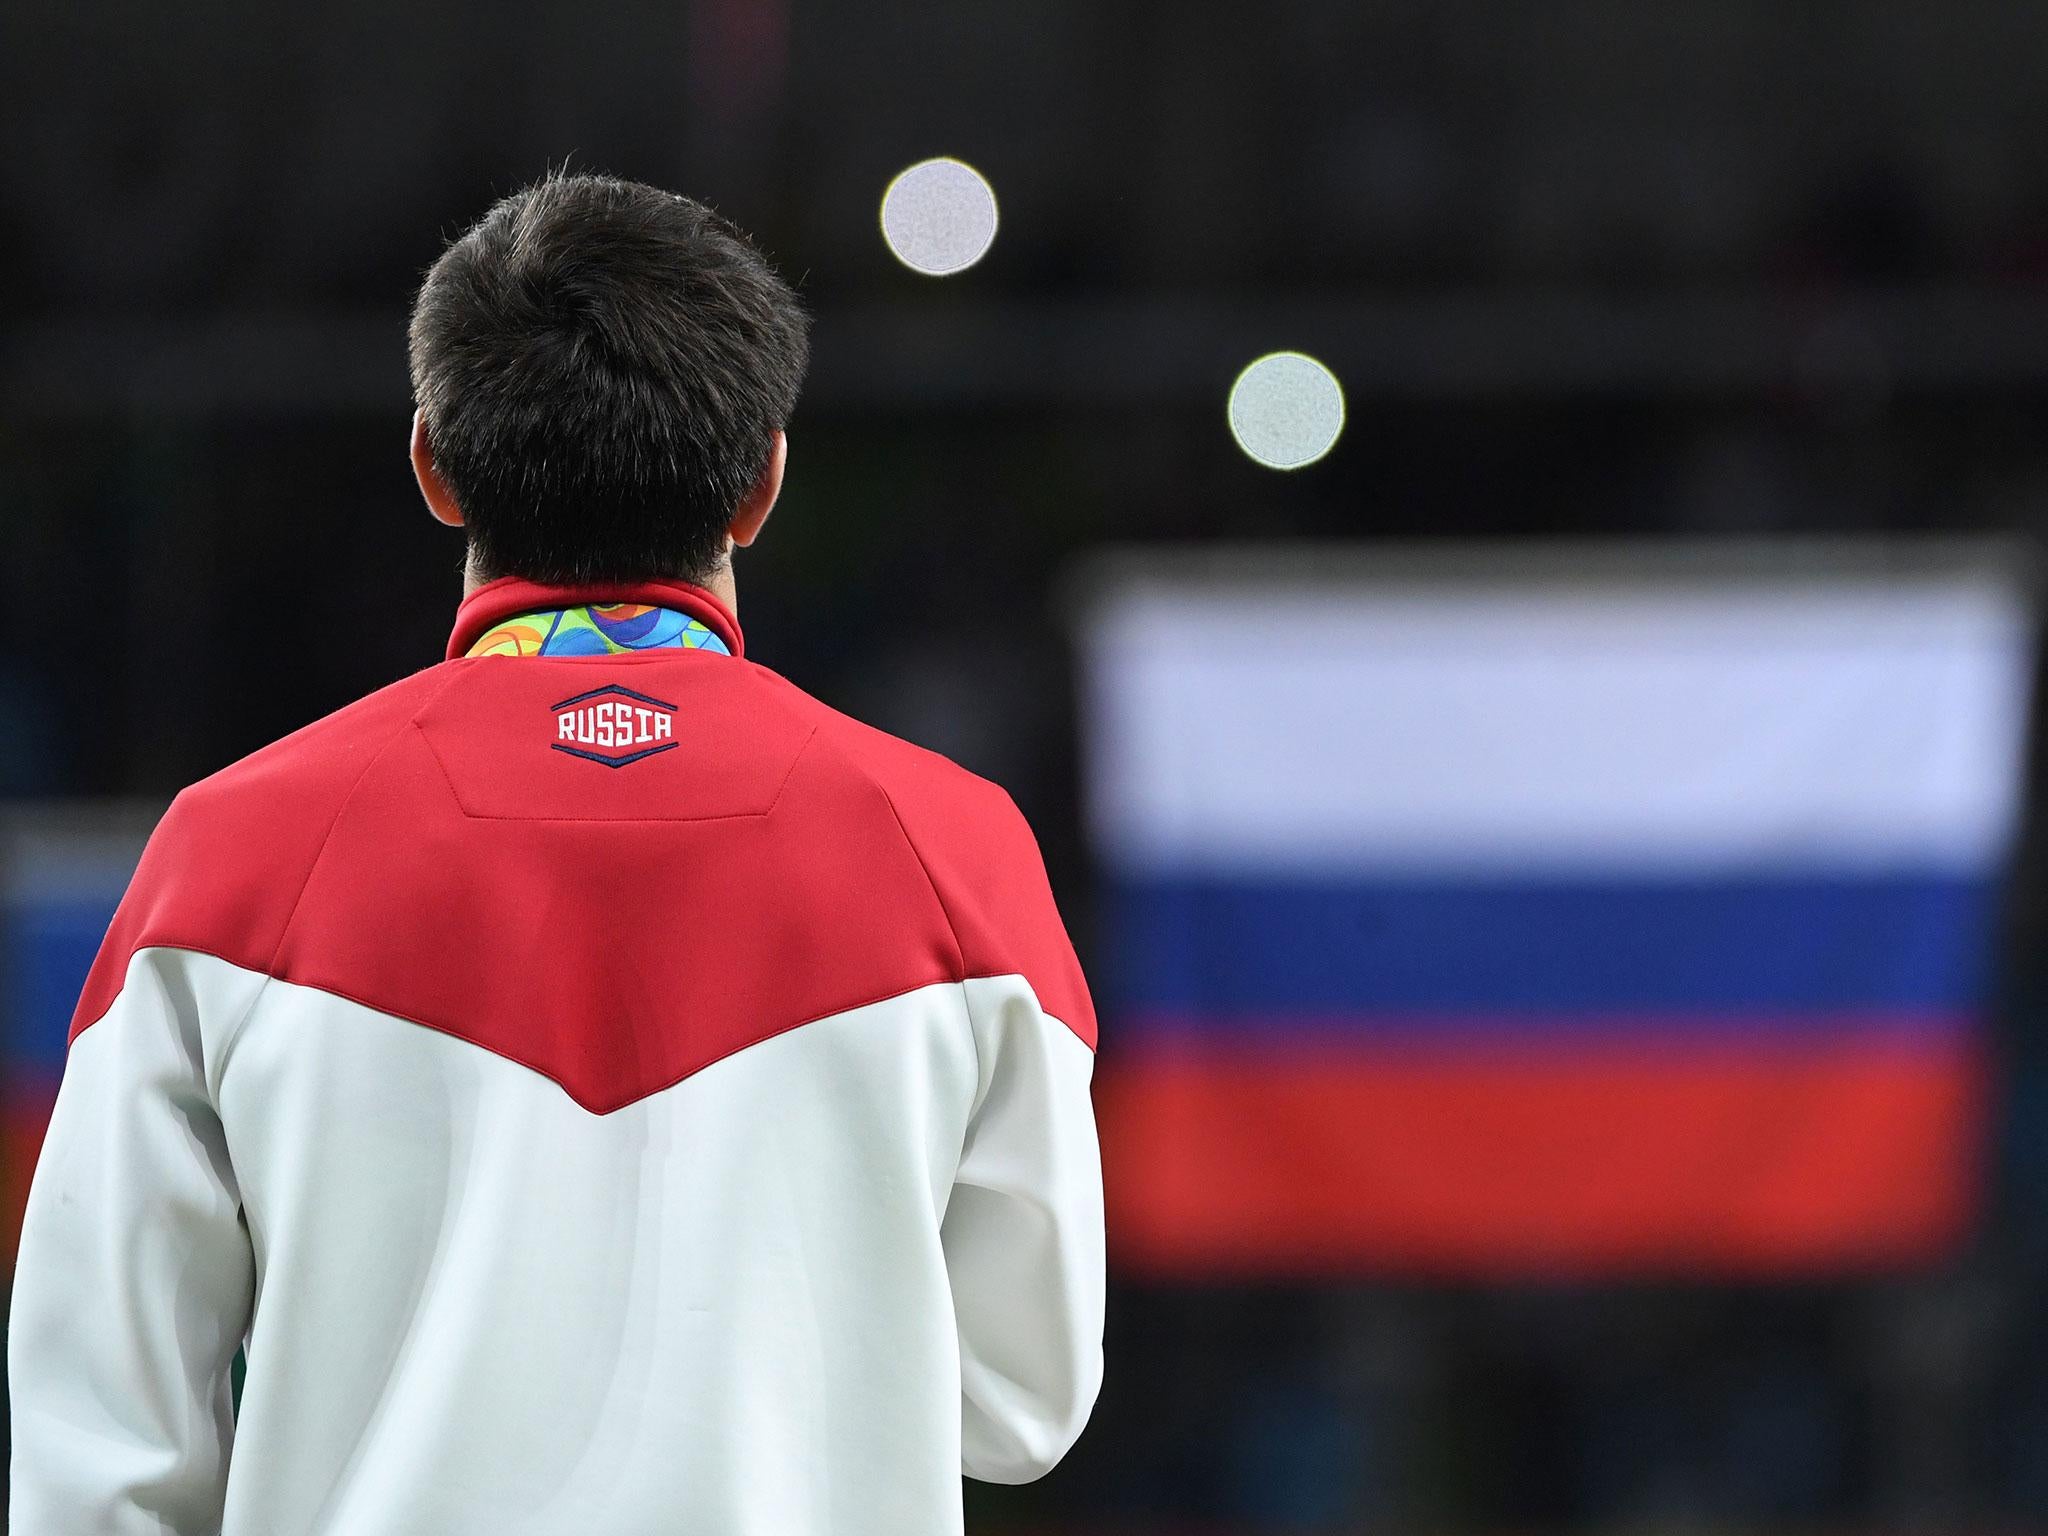 Russia's athletes have been banned from competing at the World Athletics Championships